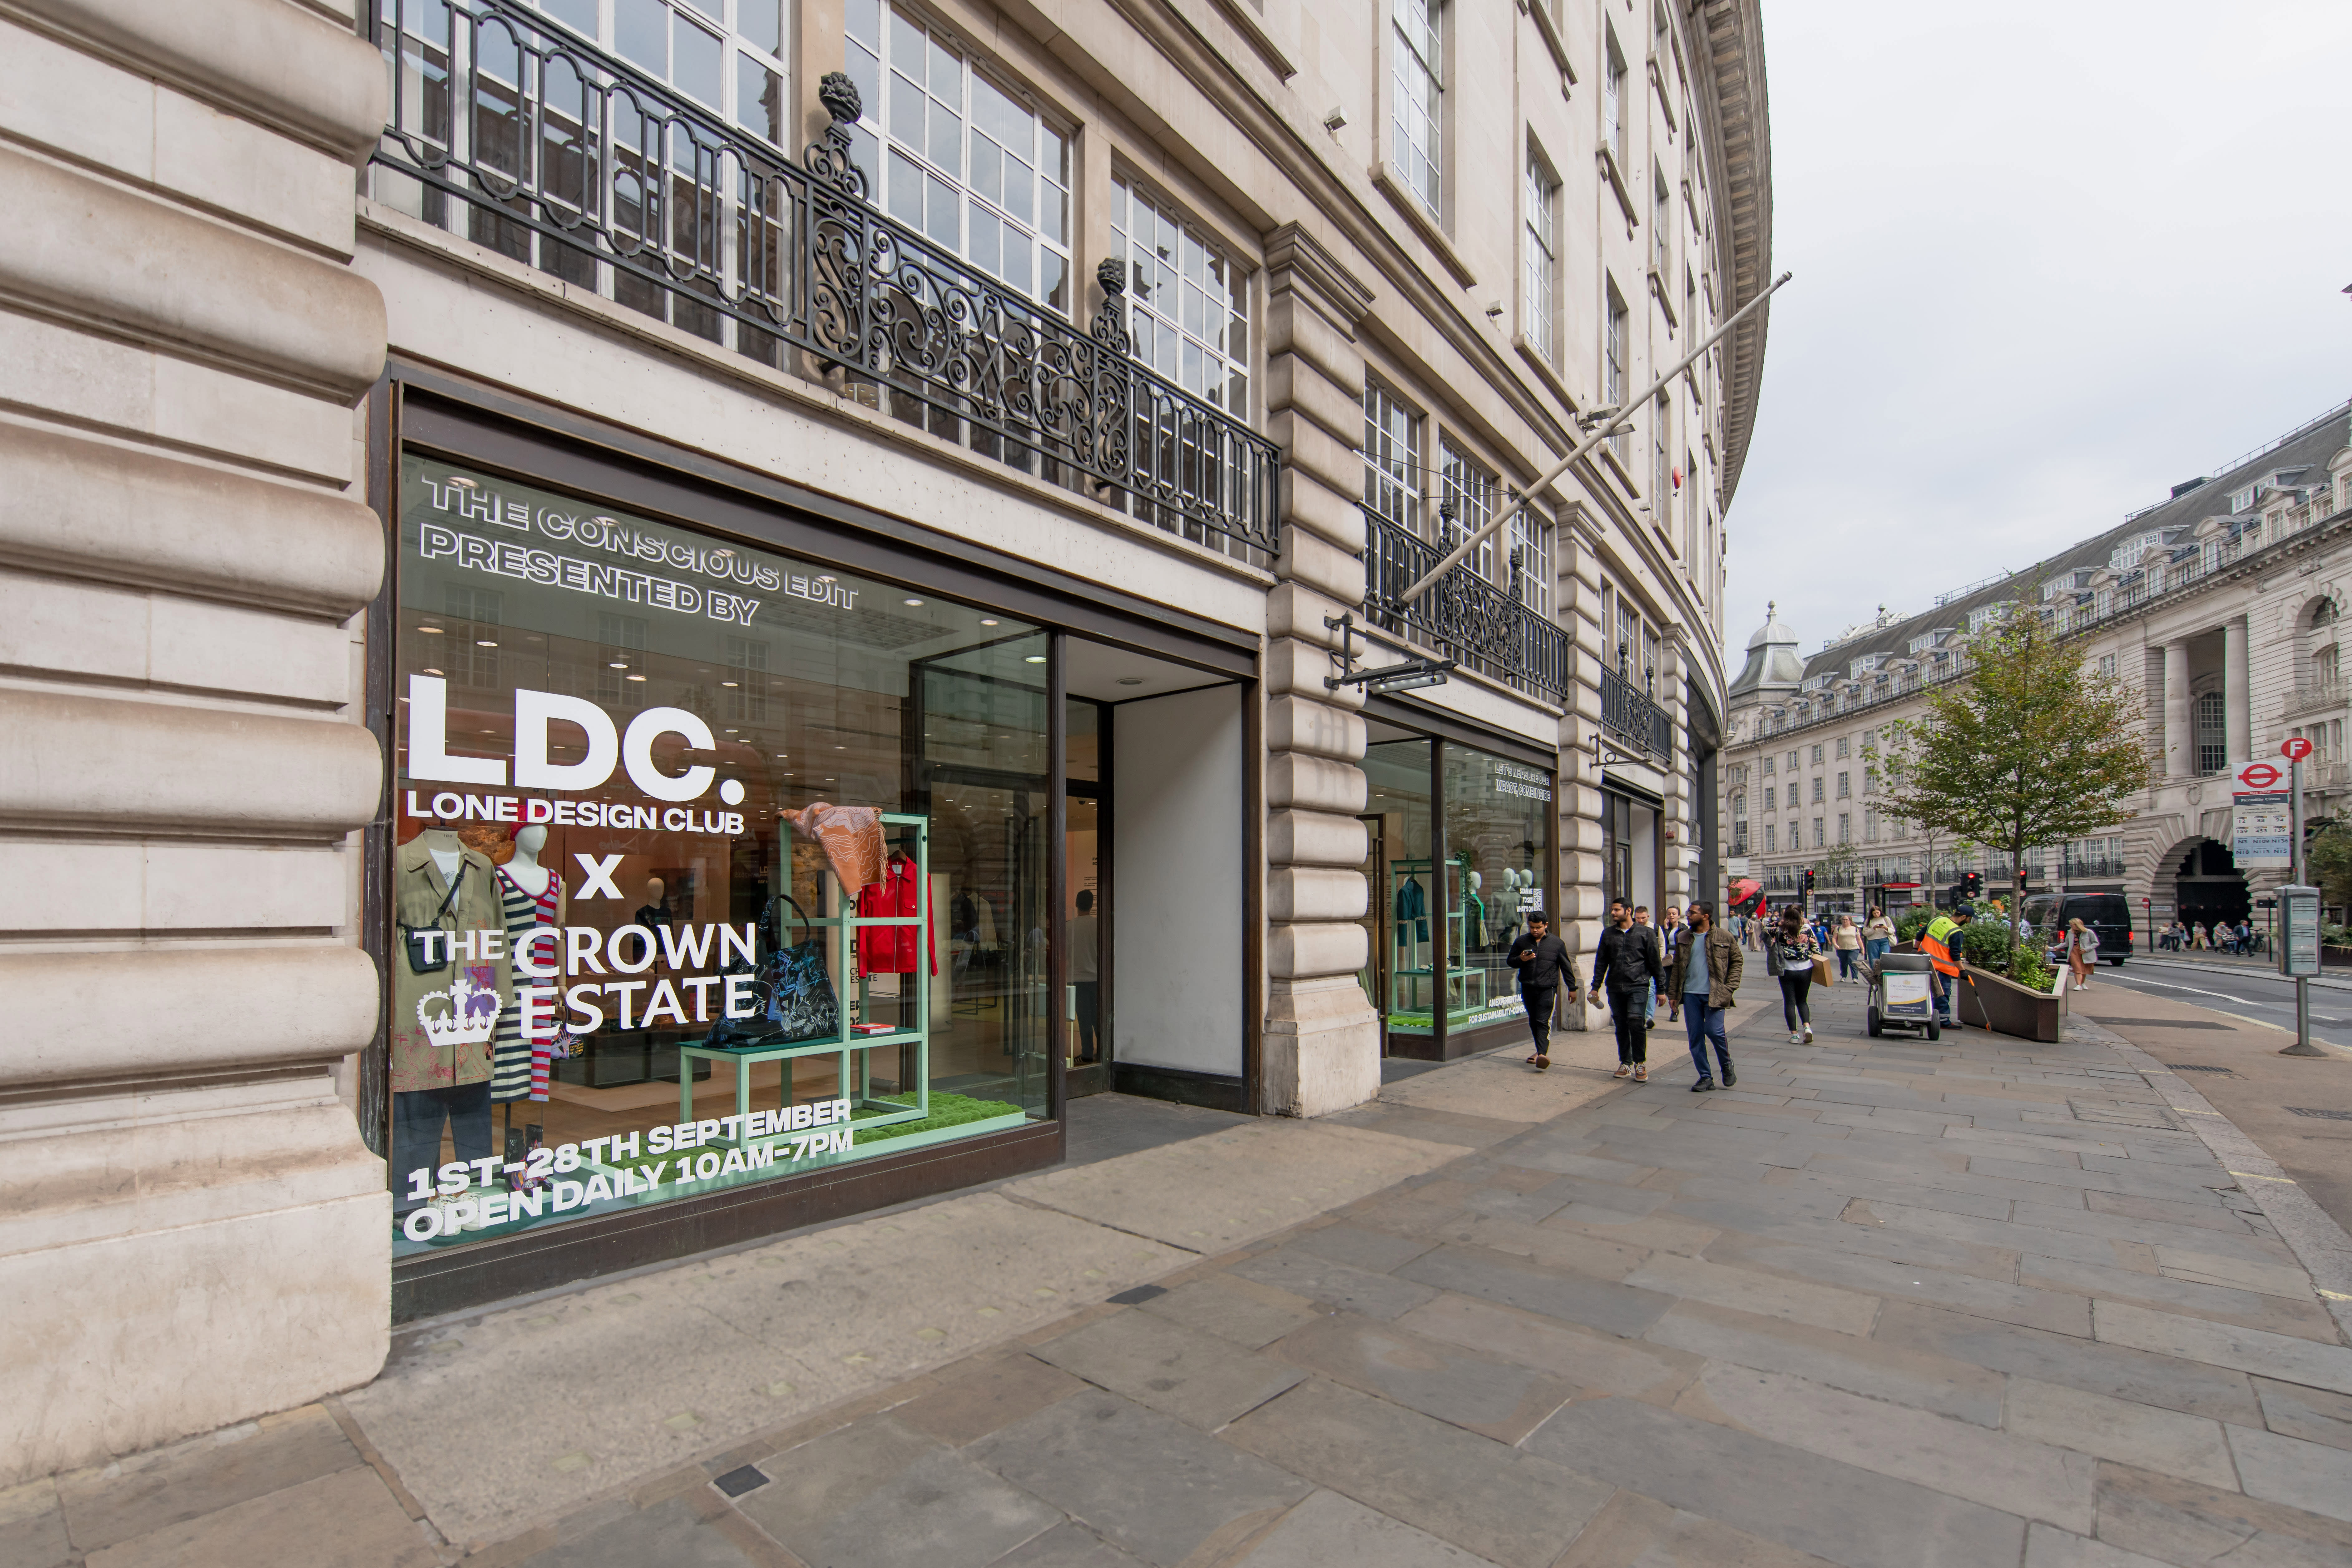 The Crown Estate and Lone Design Club pop up